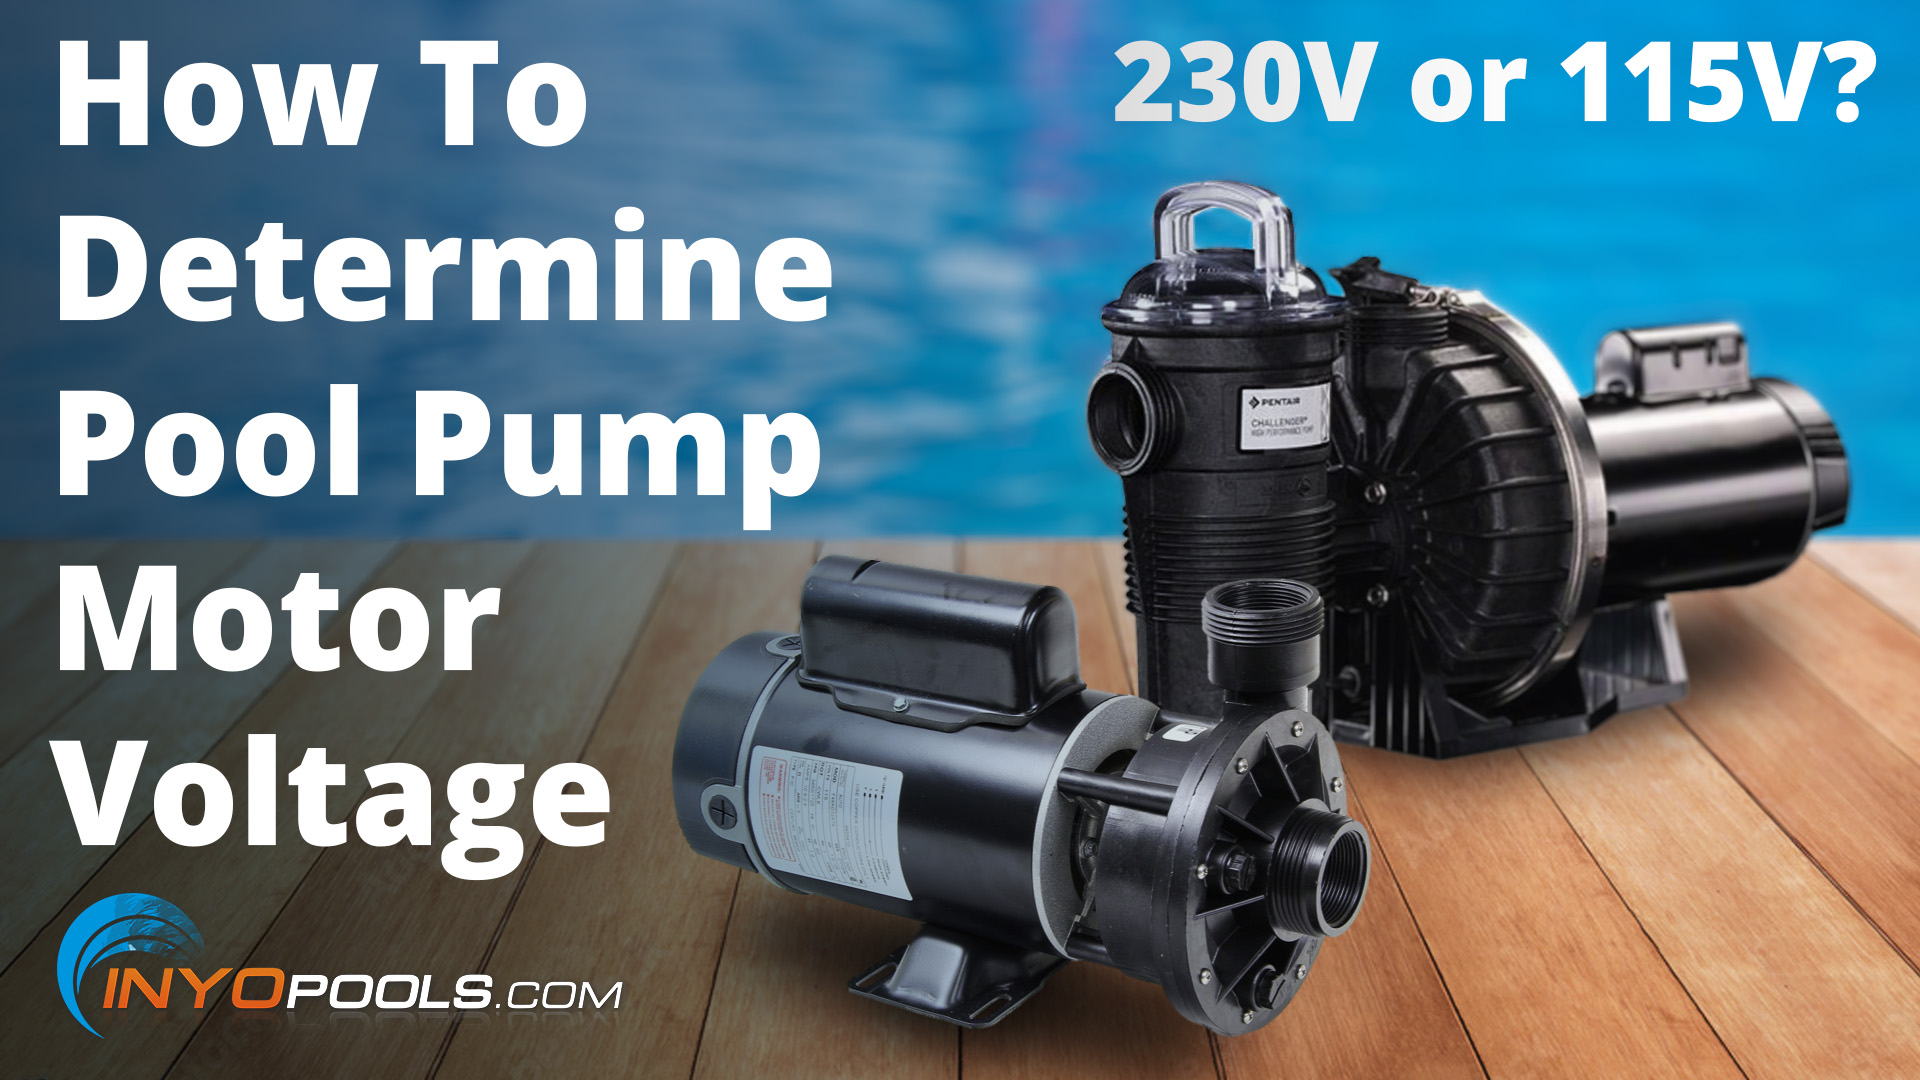 How to determine the voltage of a pool pump motor